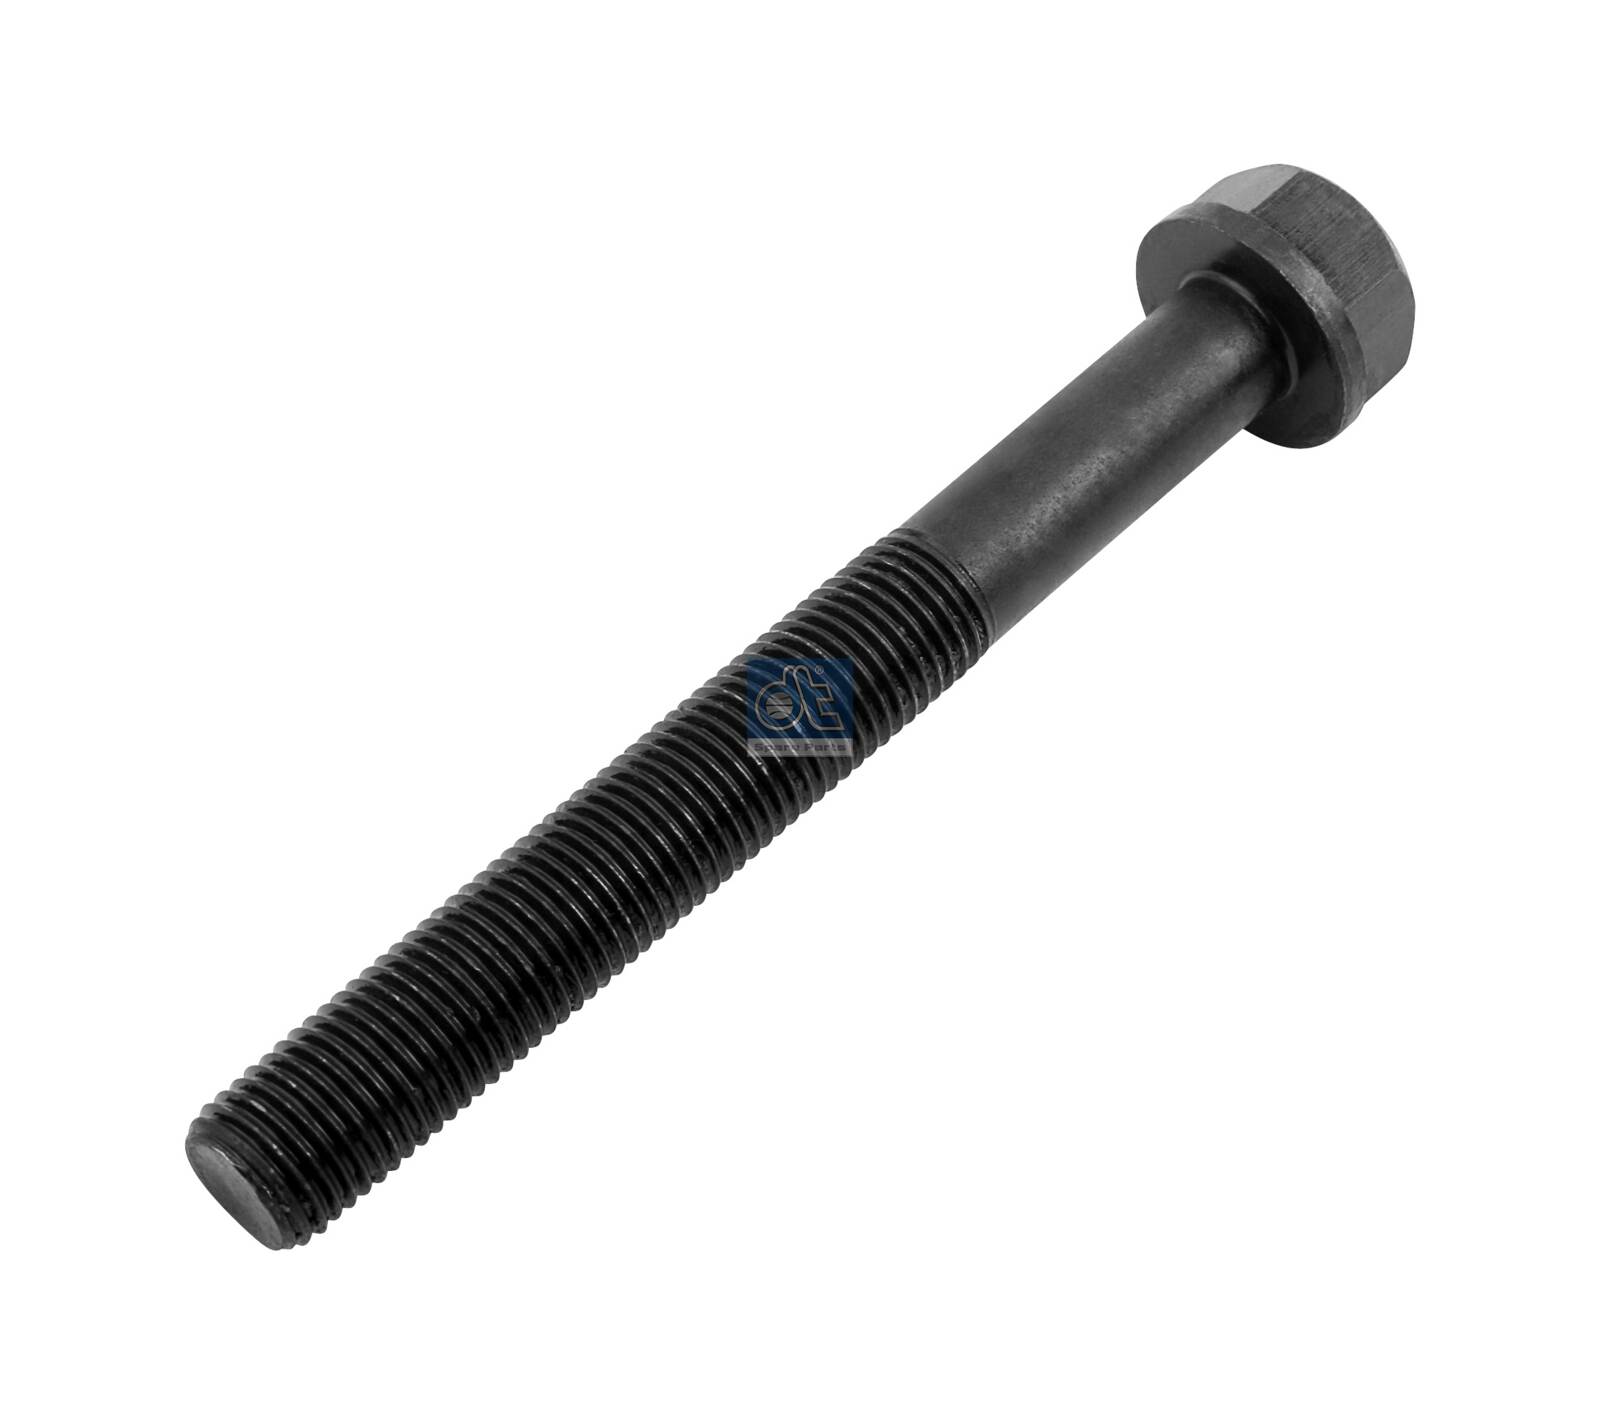 4.40127, Screw, DT Spare Parts, 4030110271, 4570110071, 51.90020.0126, 4220110071, 51.90020.0293, 4220110271, 4470110071, A4030110271, A4220110071, A4220110271, A4470110071, A4570110071, 100.002, 10734, 20010342200, 20017111, 20.0102.25000, 20.0103.42200, 51900200293, 4.40127, 51900200126